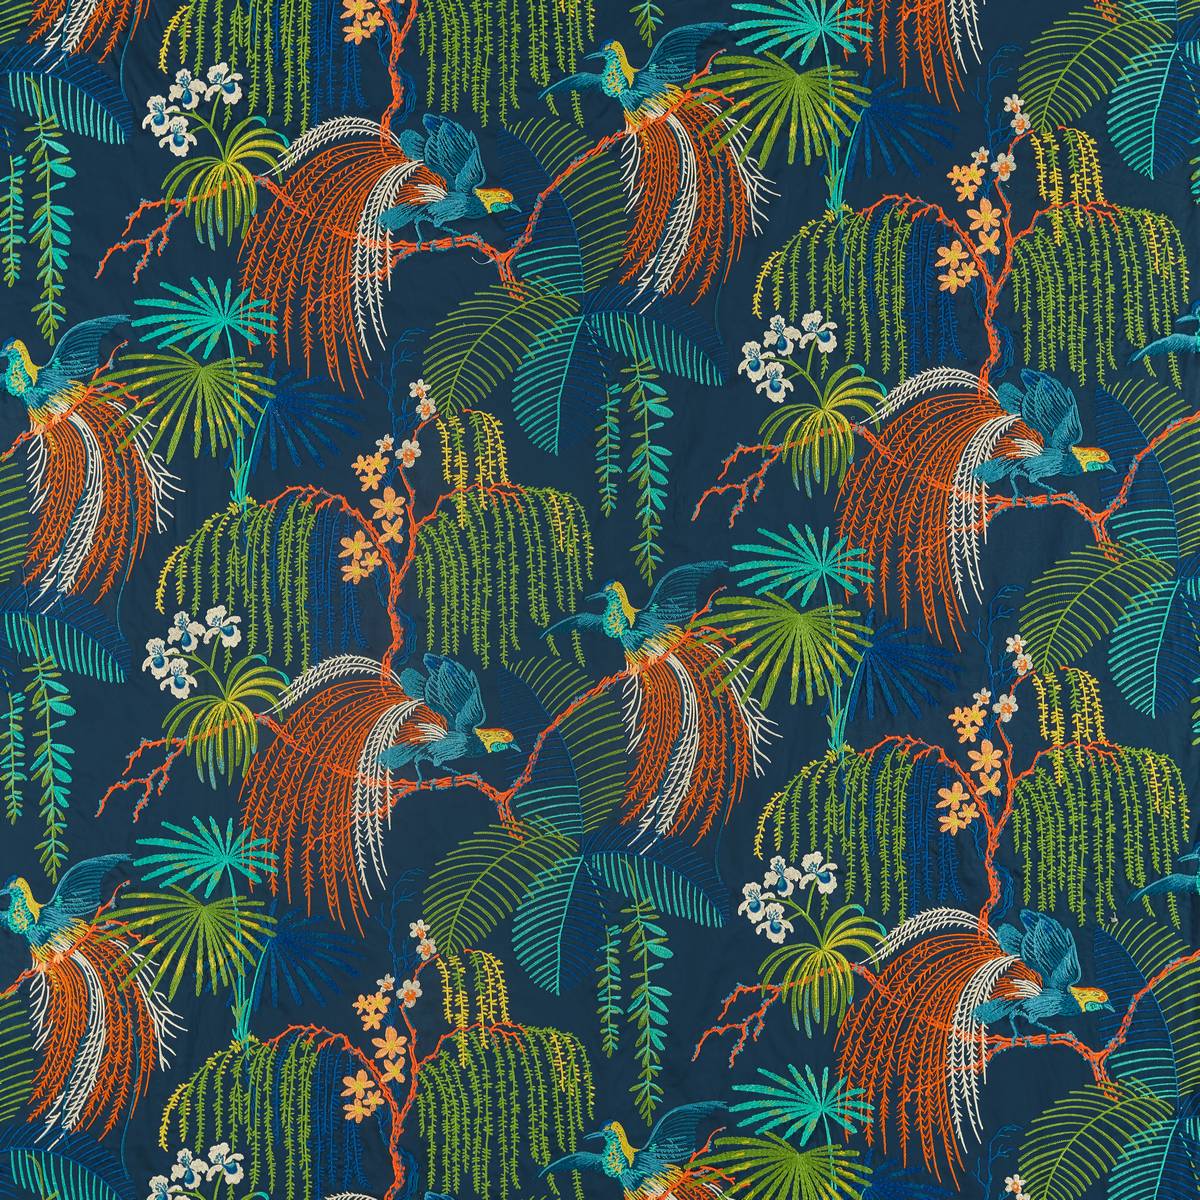 Rain Forest Embroidery Tropical Night Fabric by Sanderson